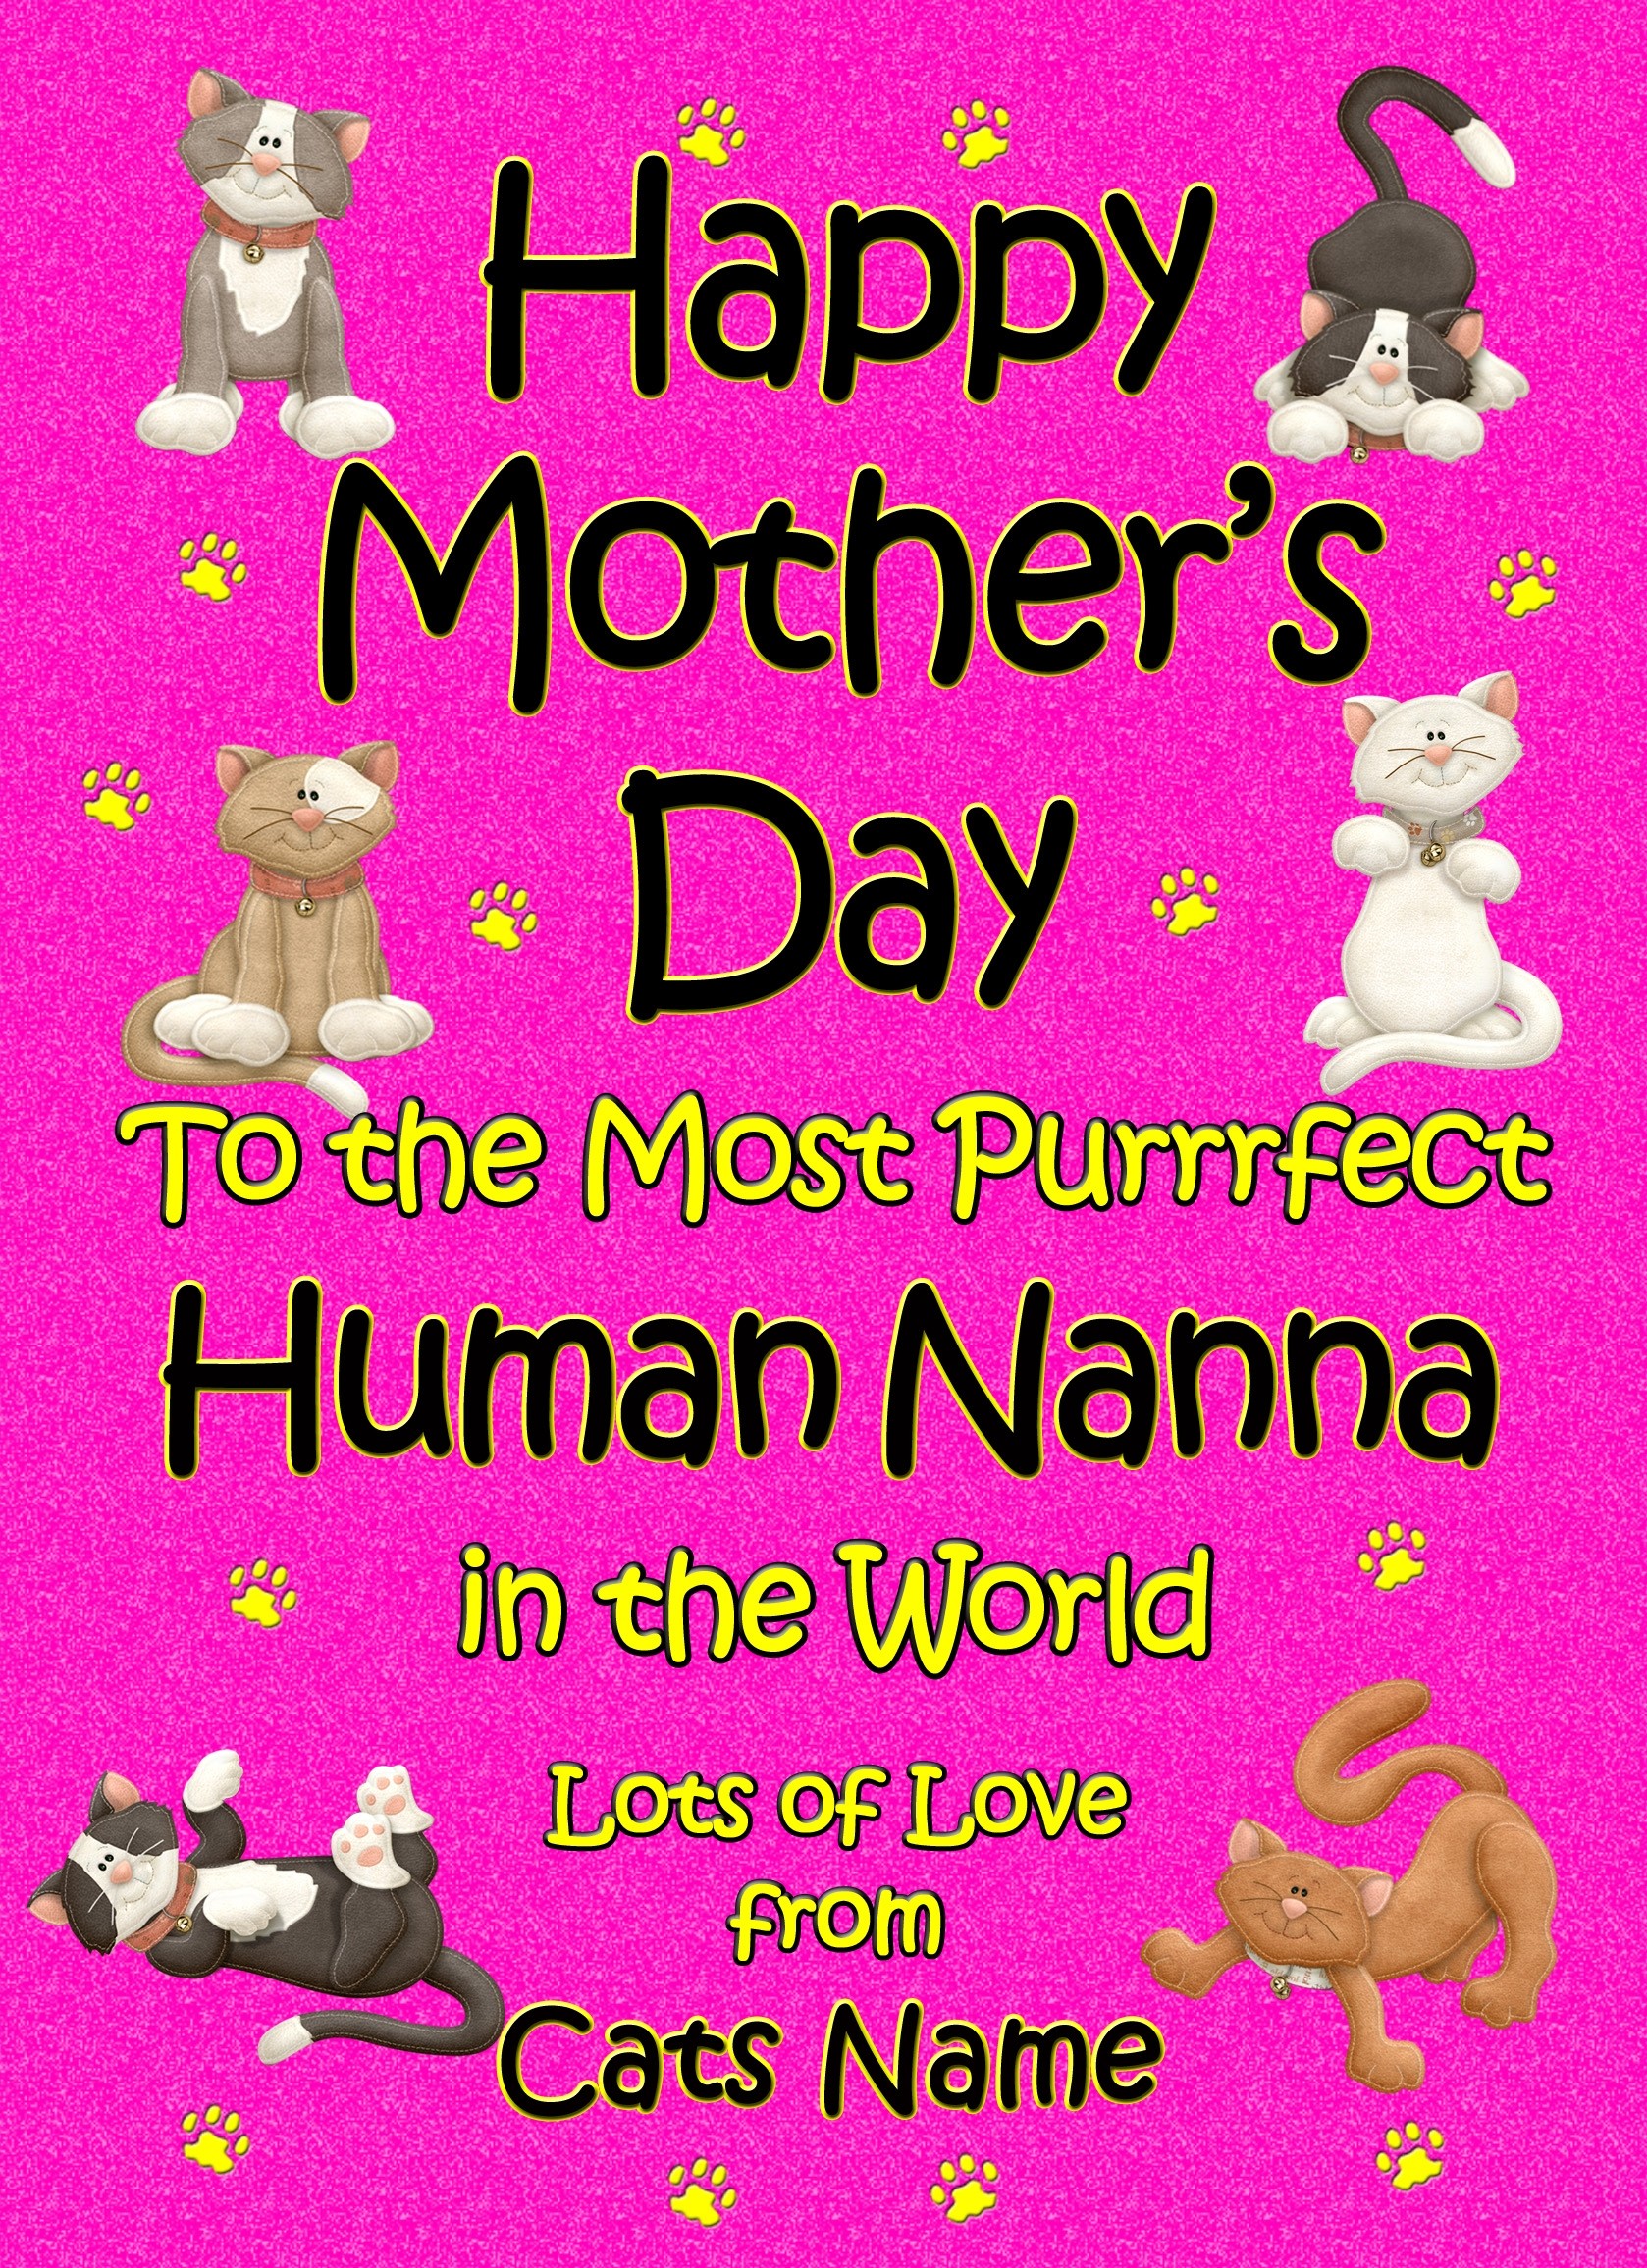 Personalised From The Cat Mothers Day Card (Cerise, Purrrfect Human Nanna)